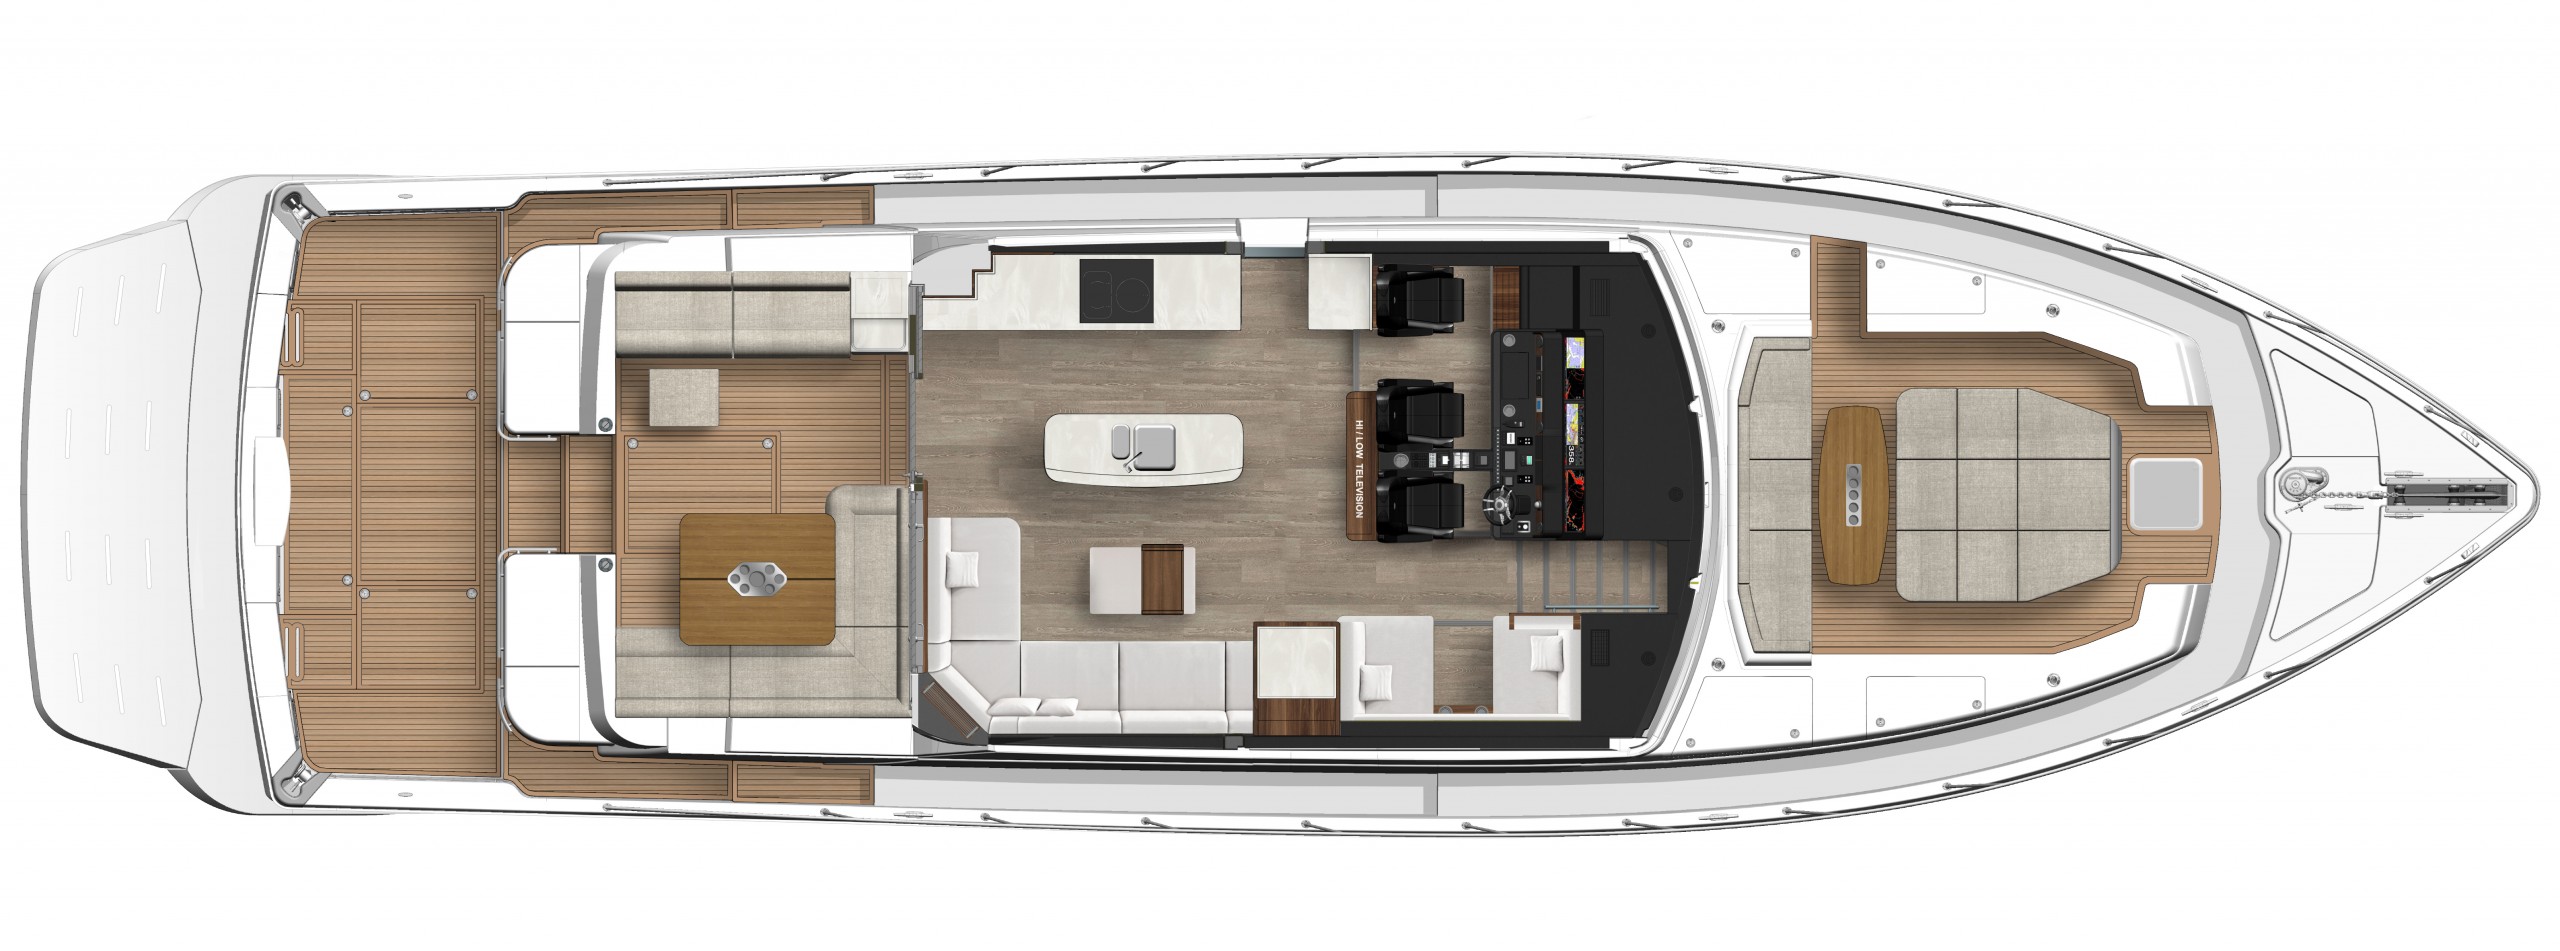 Riviera 645 SUV Saloon - Classic Edition with optional stardboard Club Lounge Foredeck seating and teak Bait tank in leiu of transom lounge